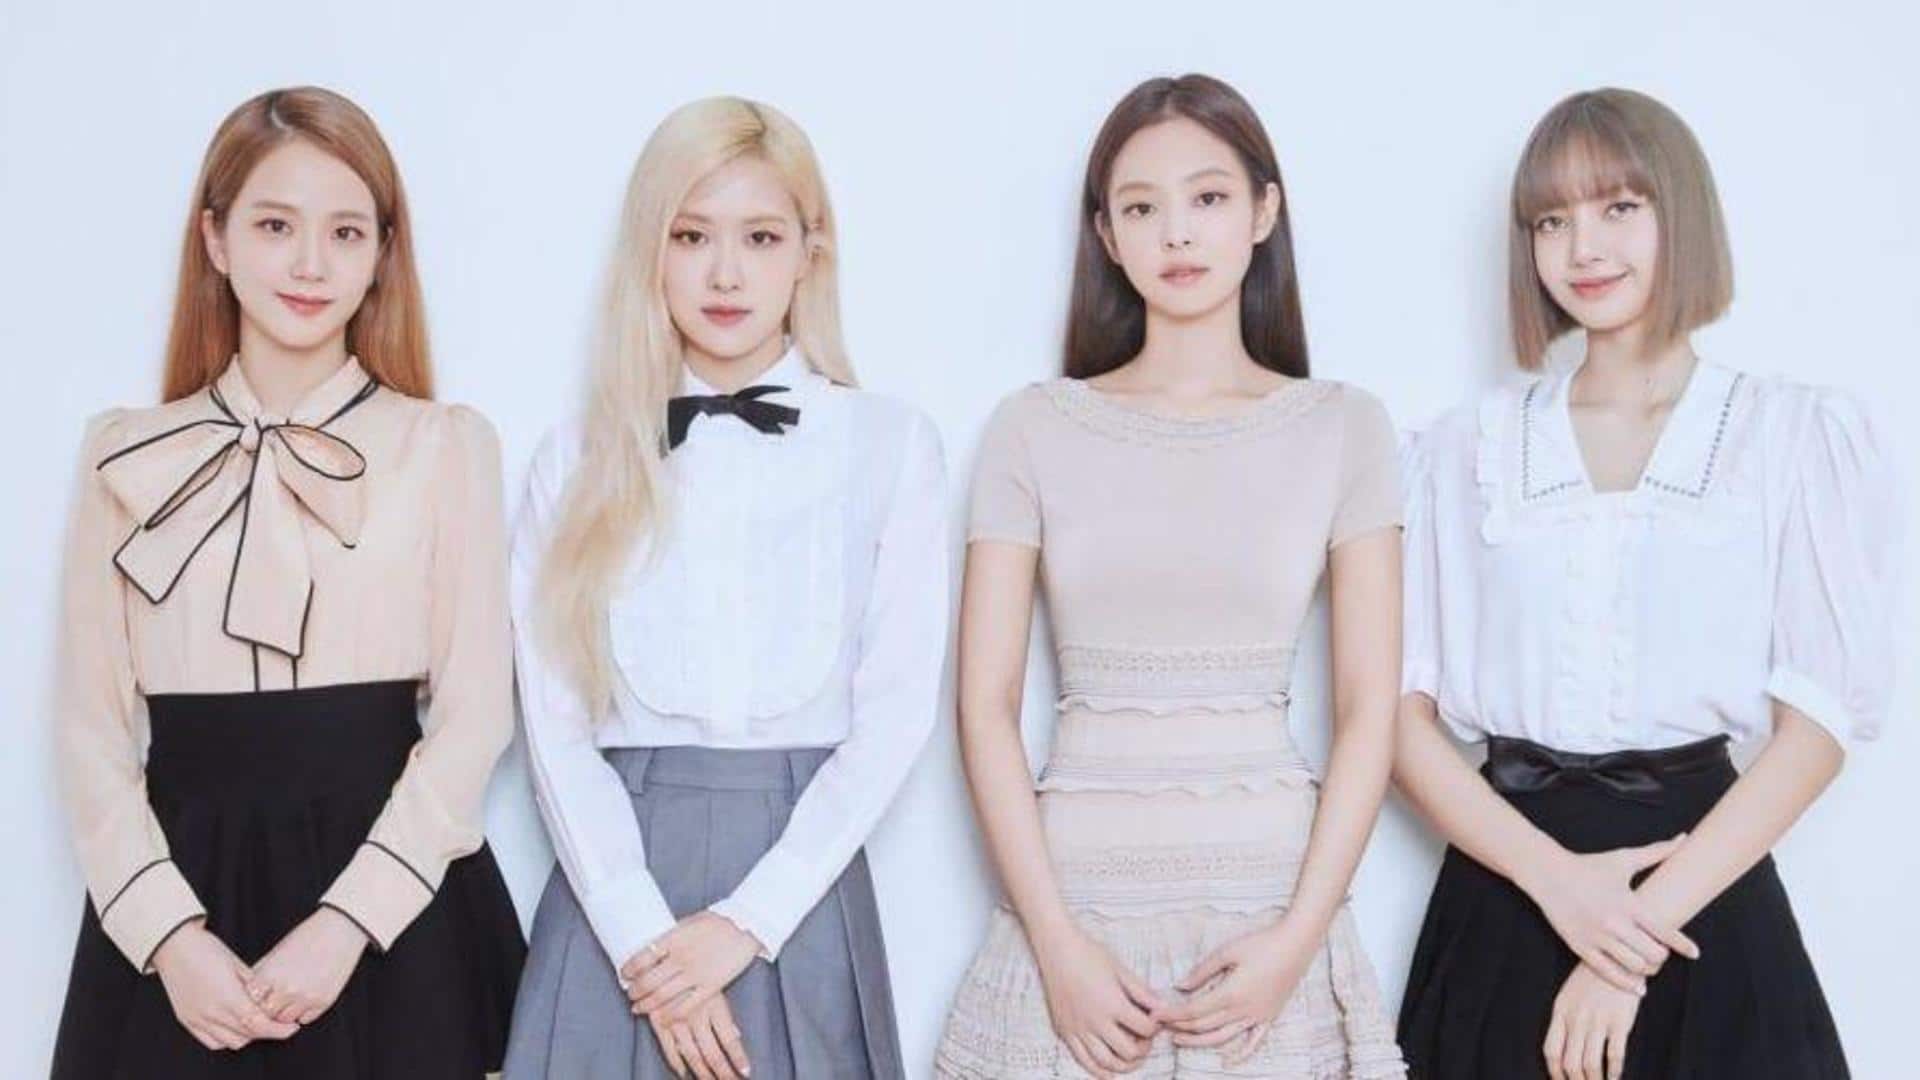 BLACKPINK fans want 'Le Parisien' to apologize; here's why